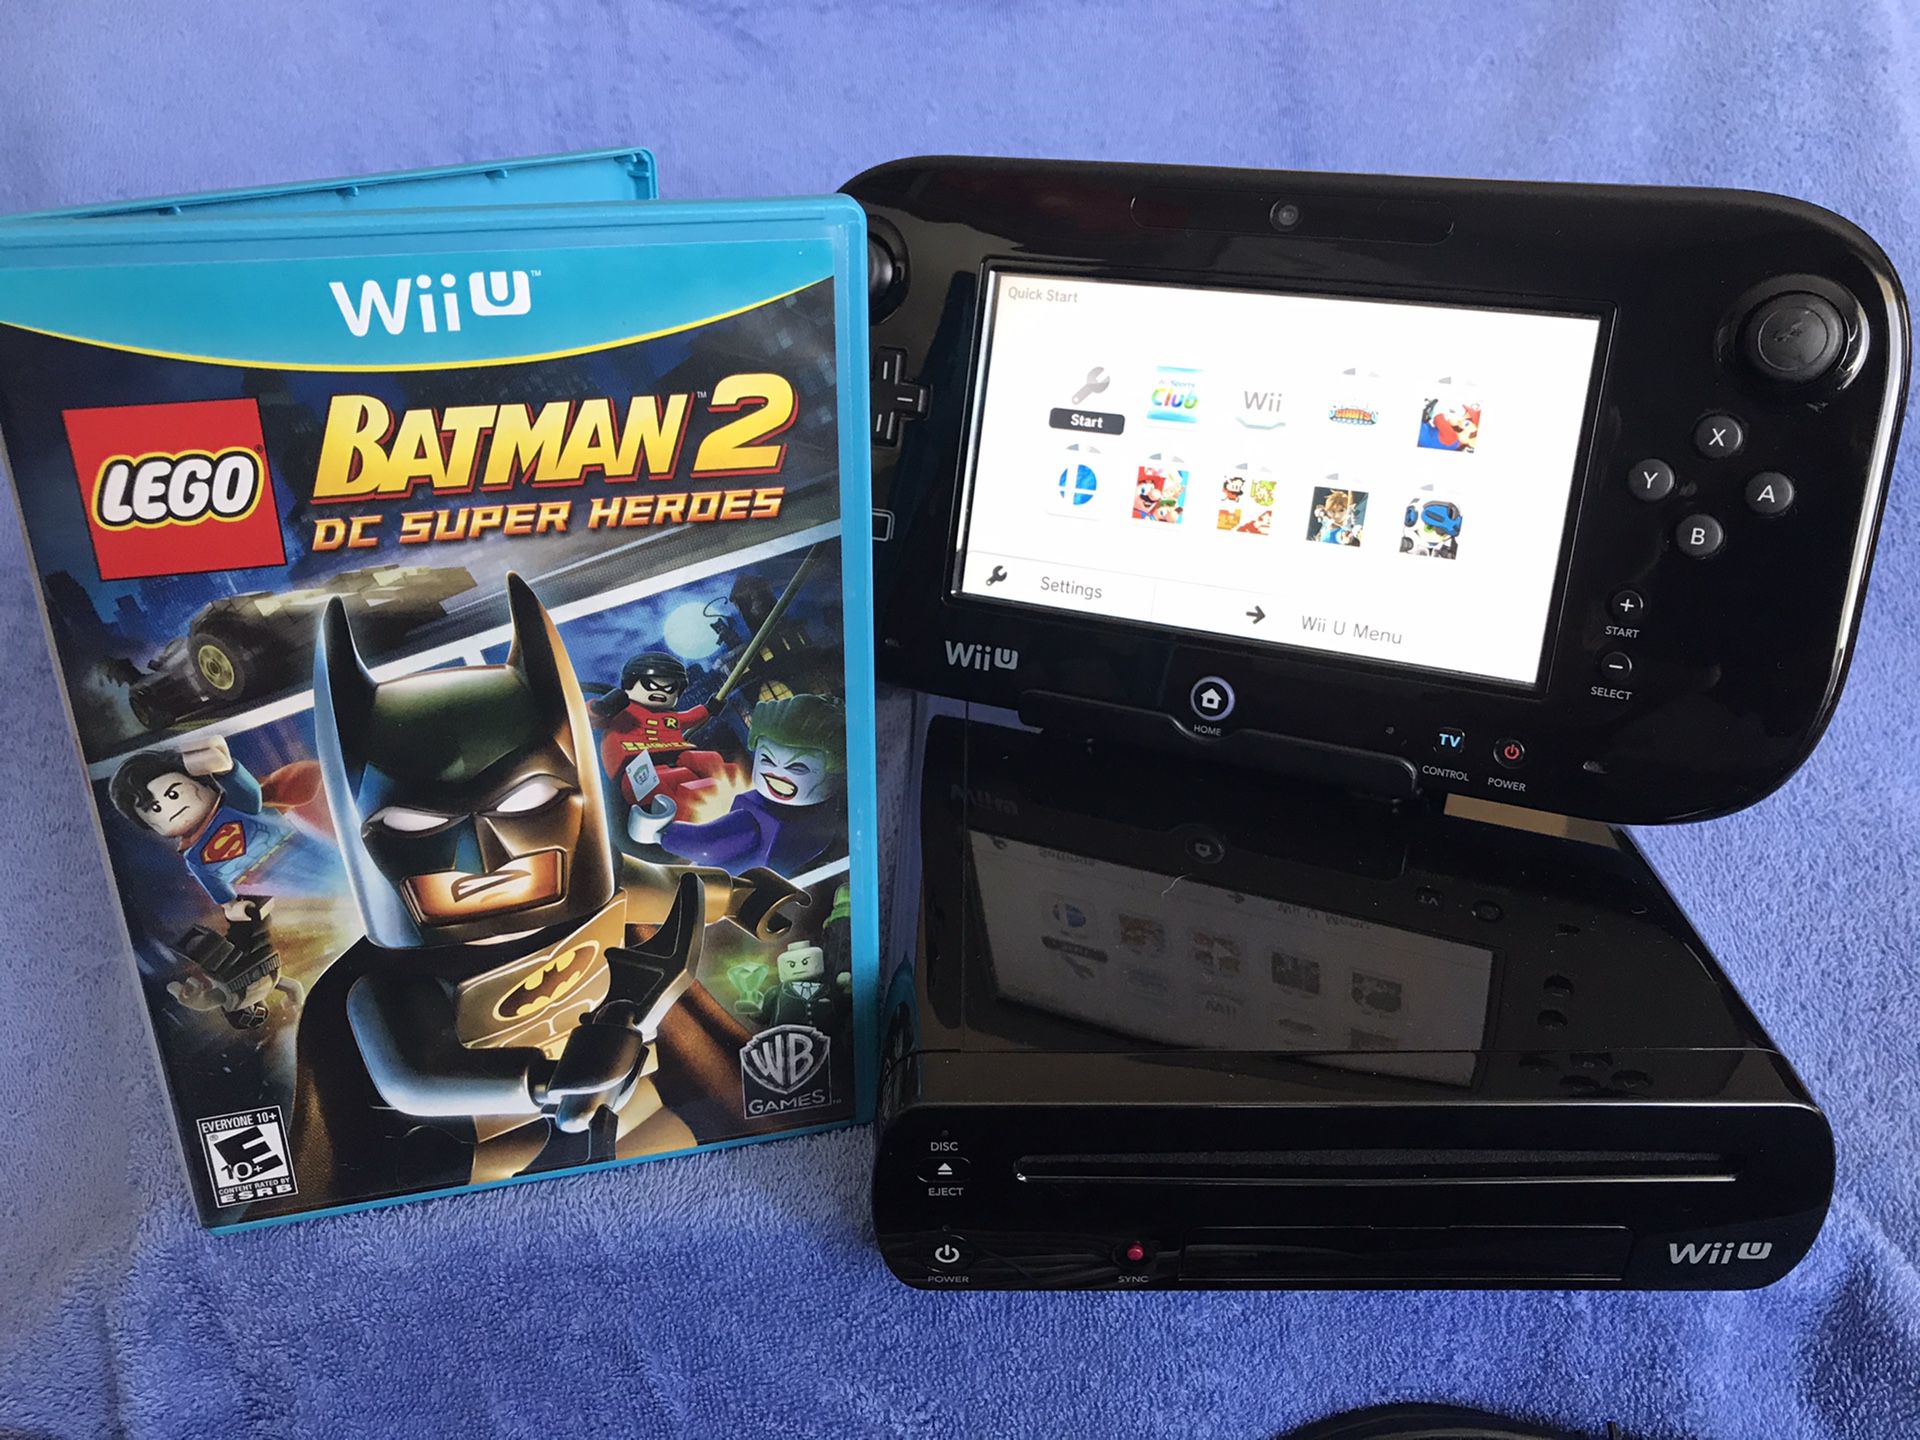 32gb Nintendo Wii U / WiiU video game system with 2 games and plays the older regular Wii games too!